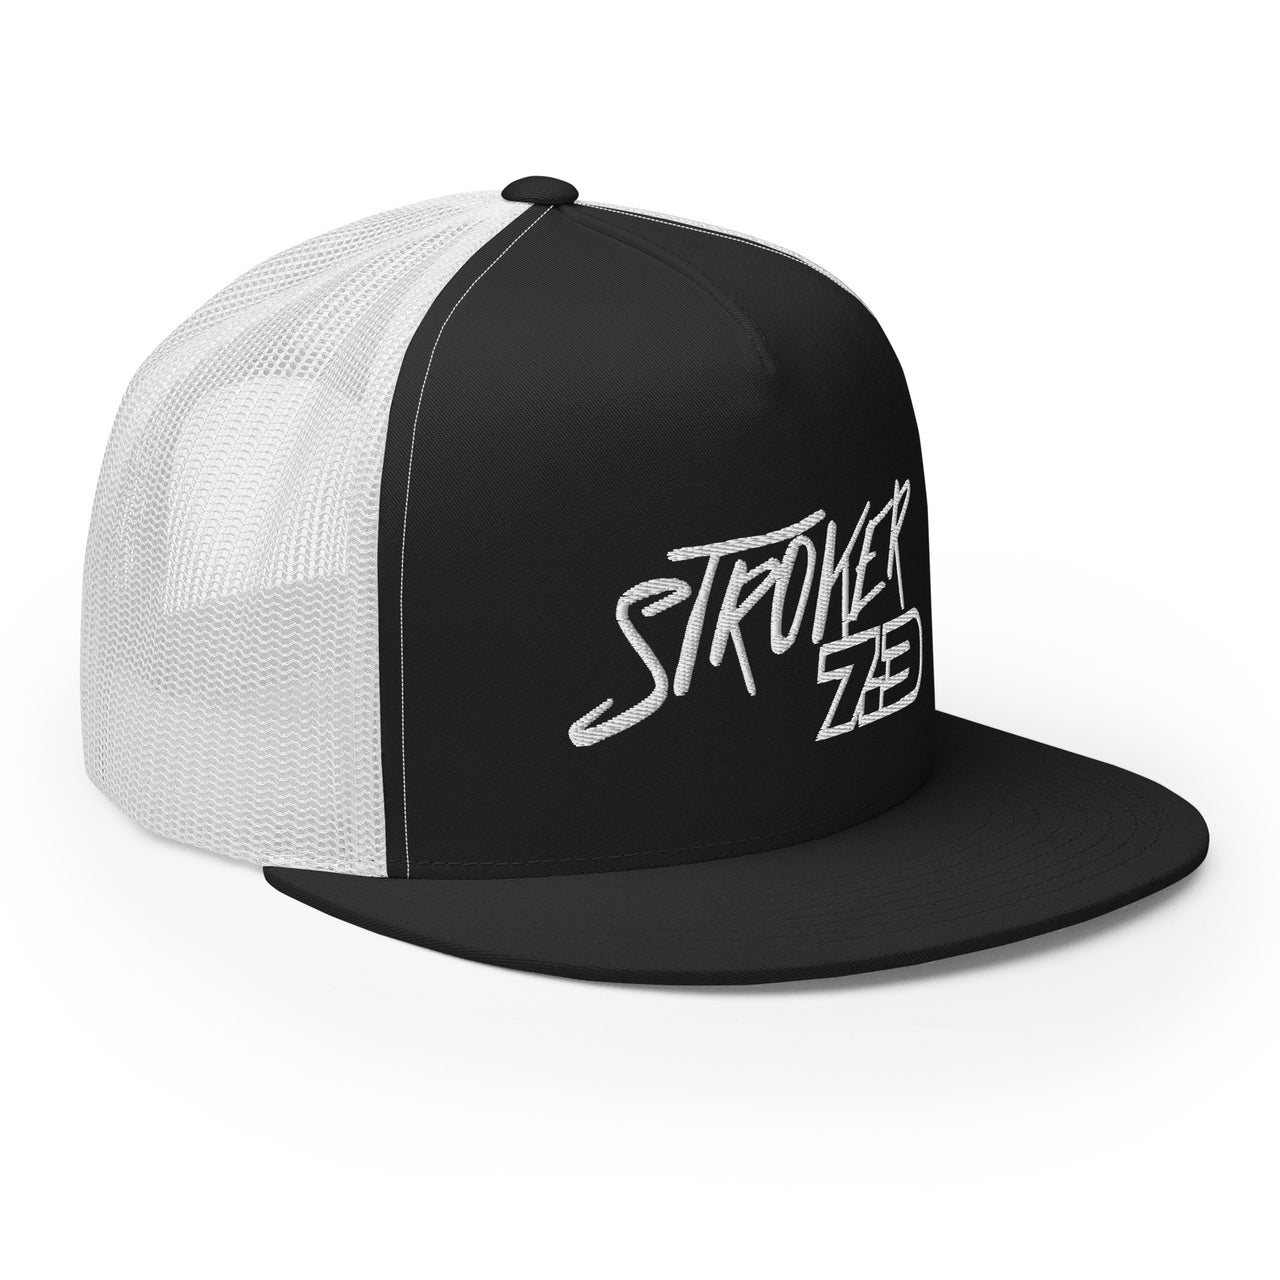 7.3 power stroke diesel trucker hat in black and white - right view